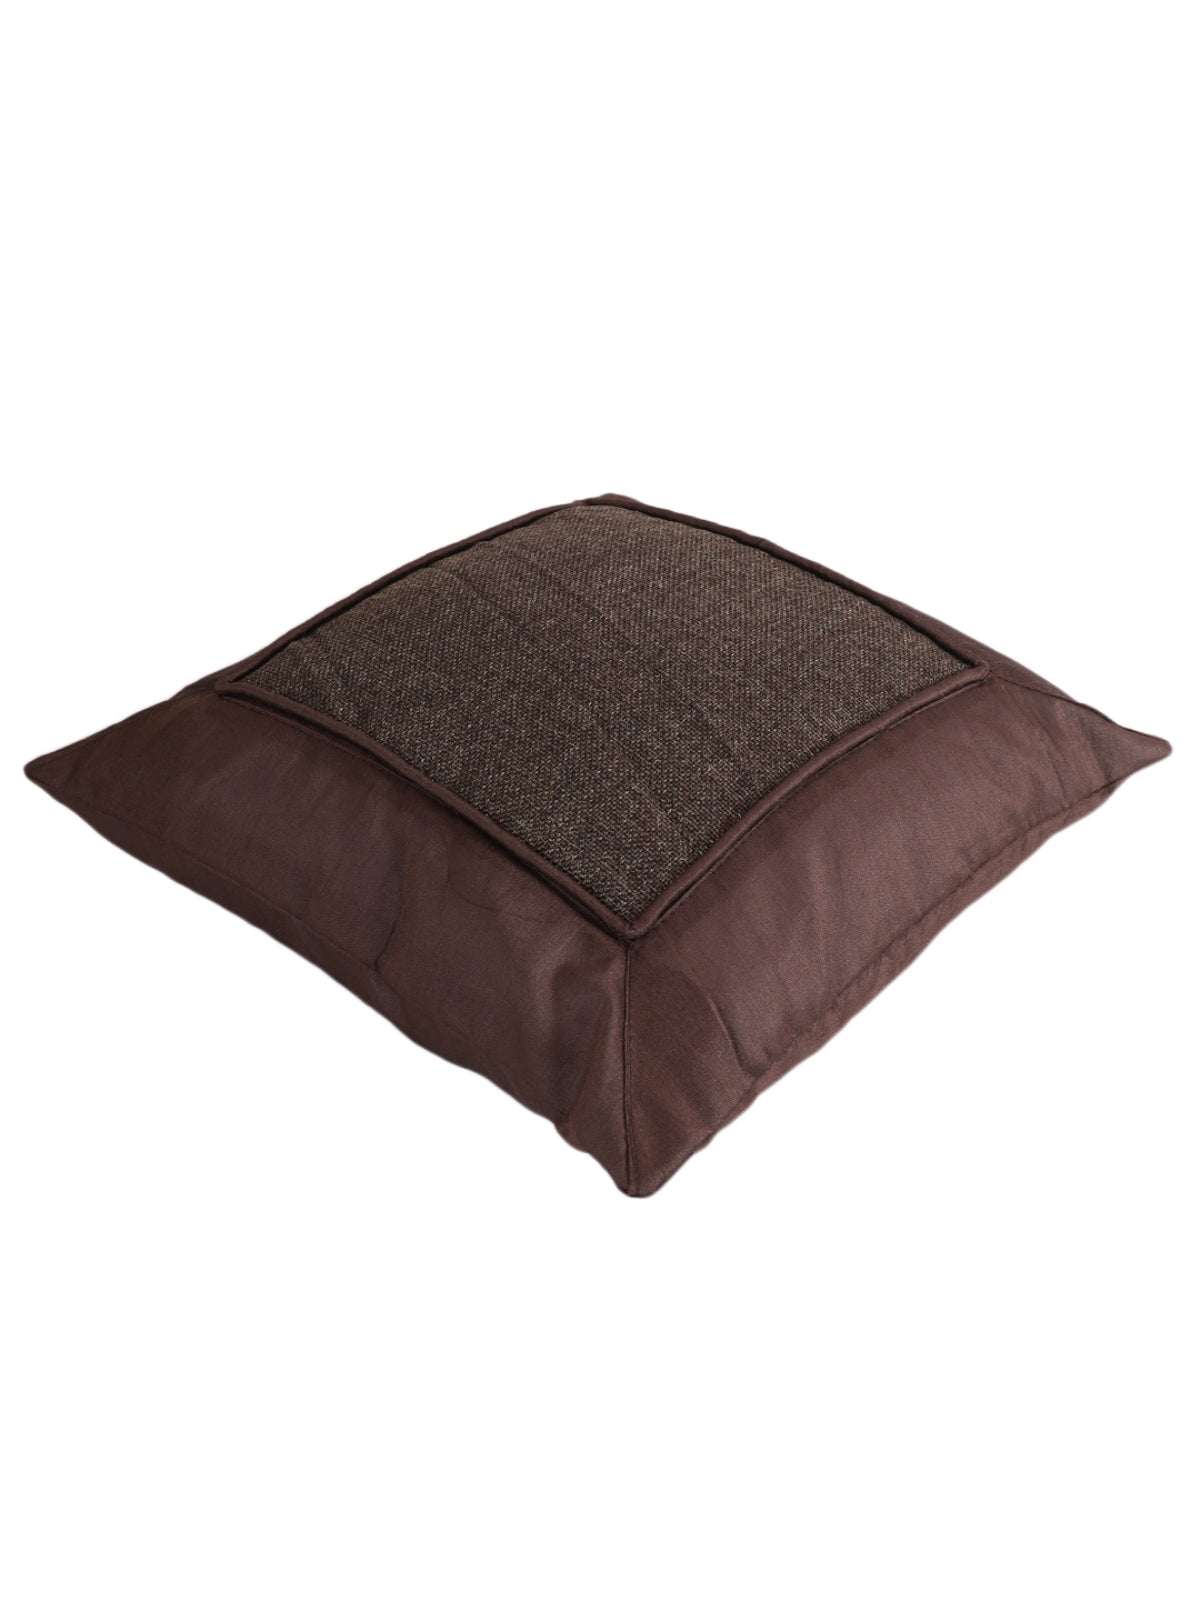 Polyester Geometric Design Cushion Covers 16x16 Inches, Set of 5 - Coffee Brown